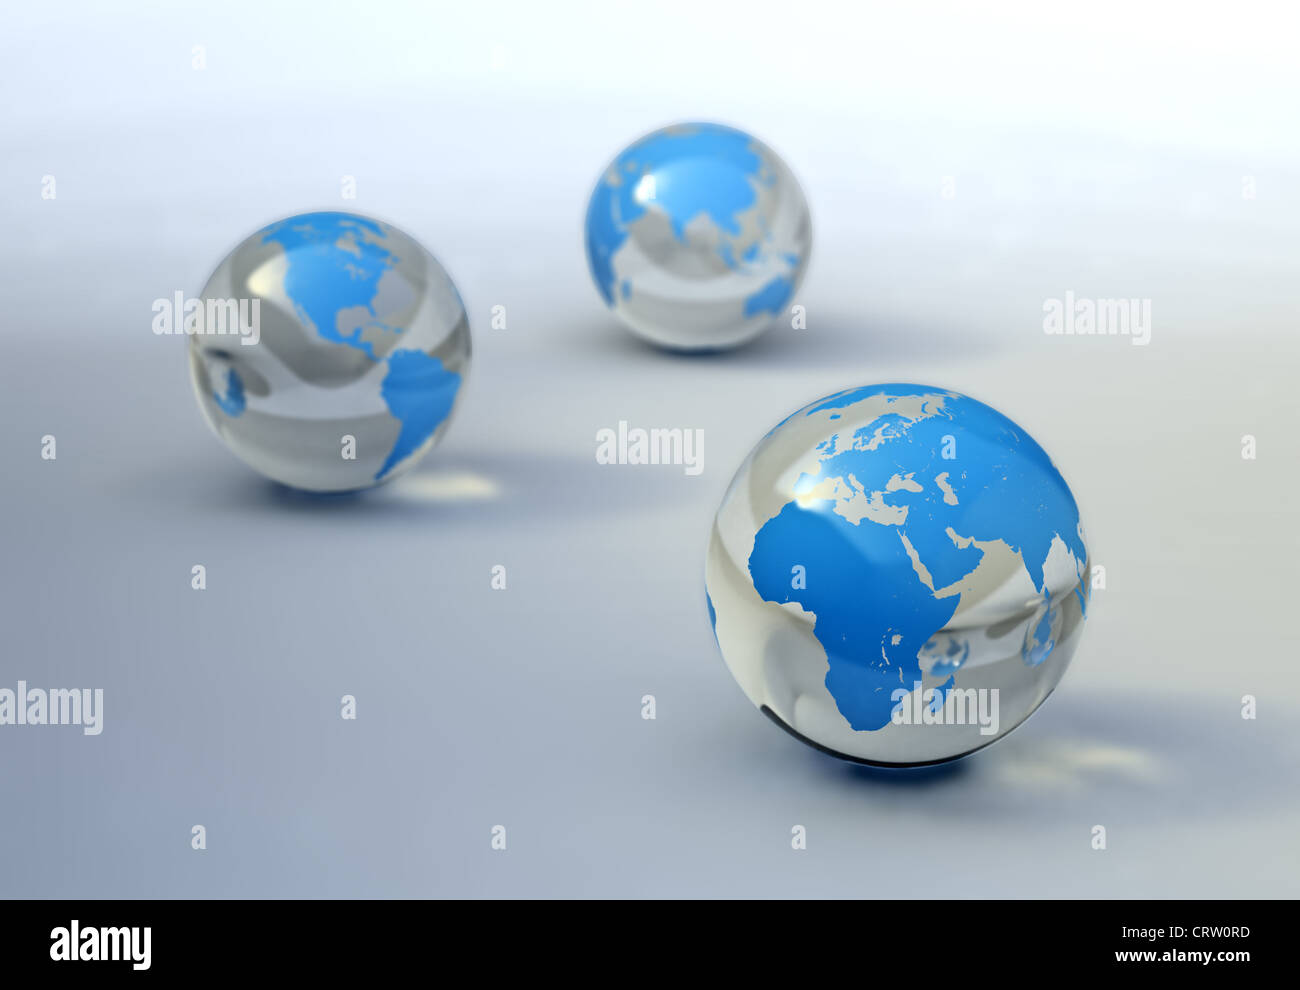 World map on glass spheres abstract image Stock Photo